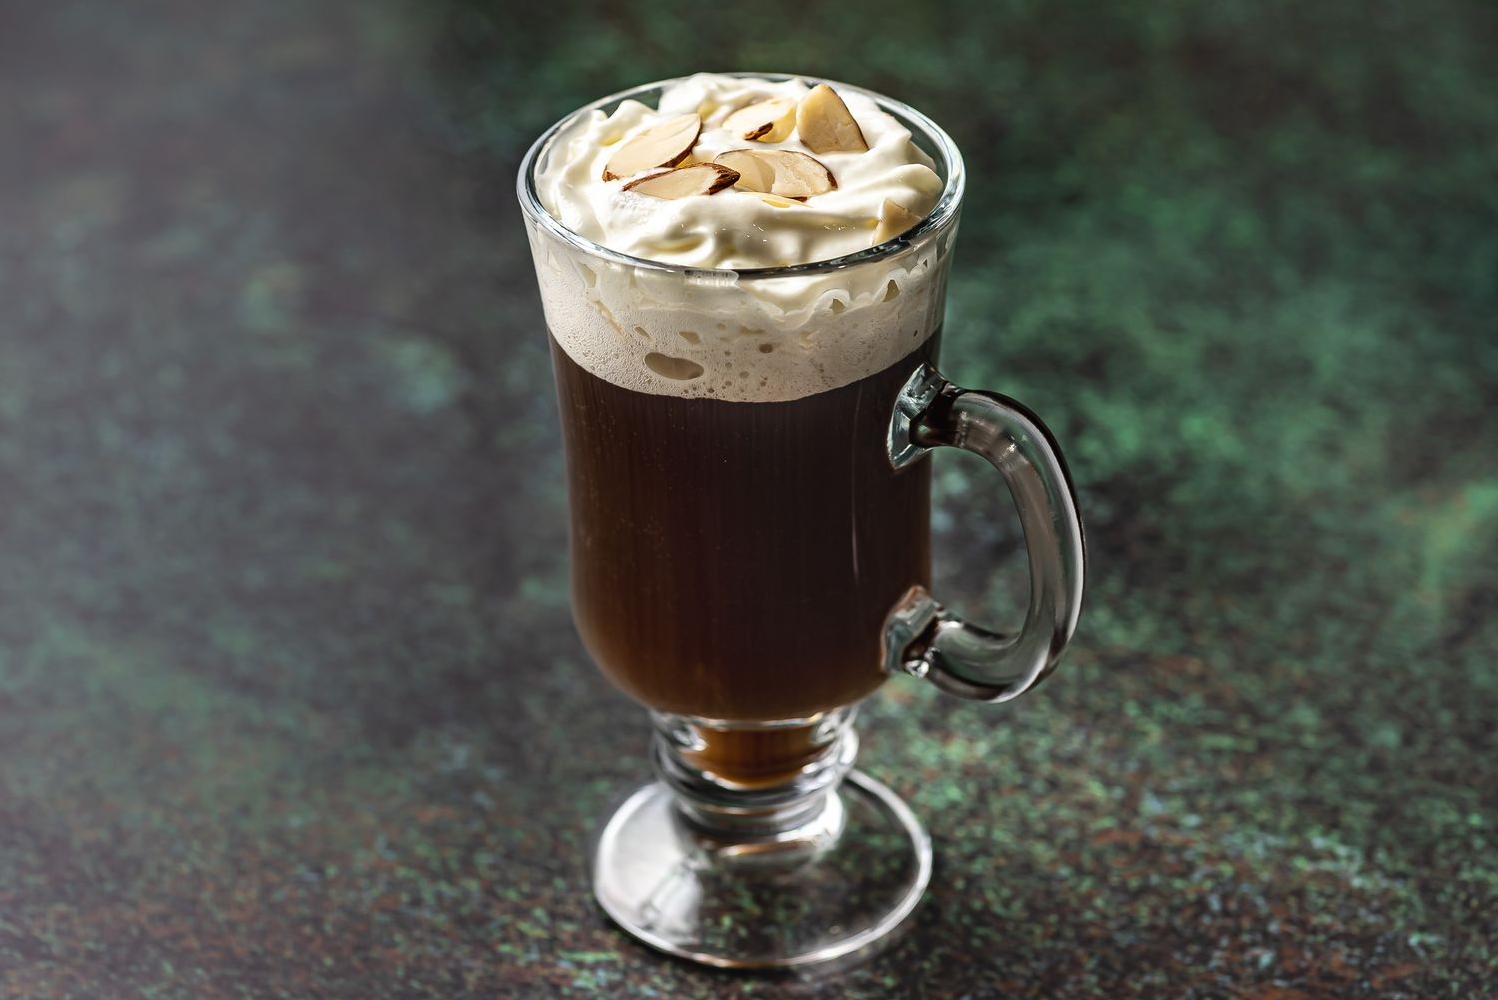  A sip of the Caribbean in every cup with this coffee recipe!